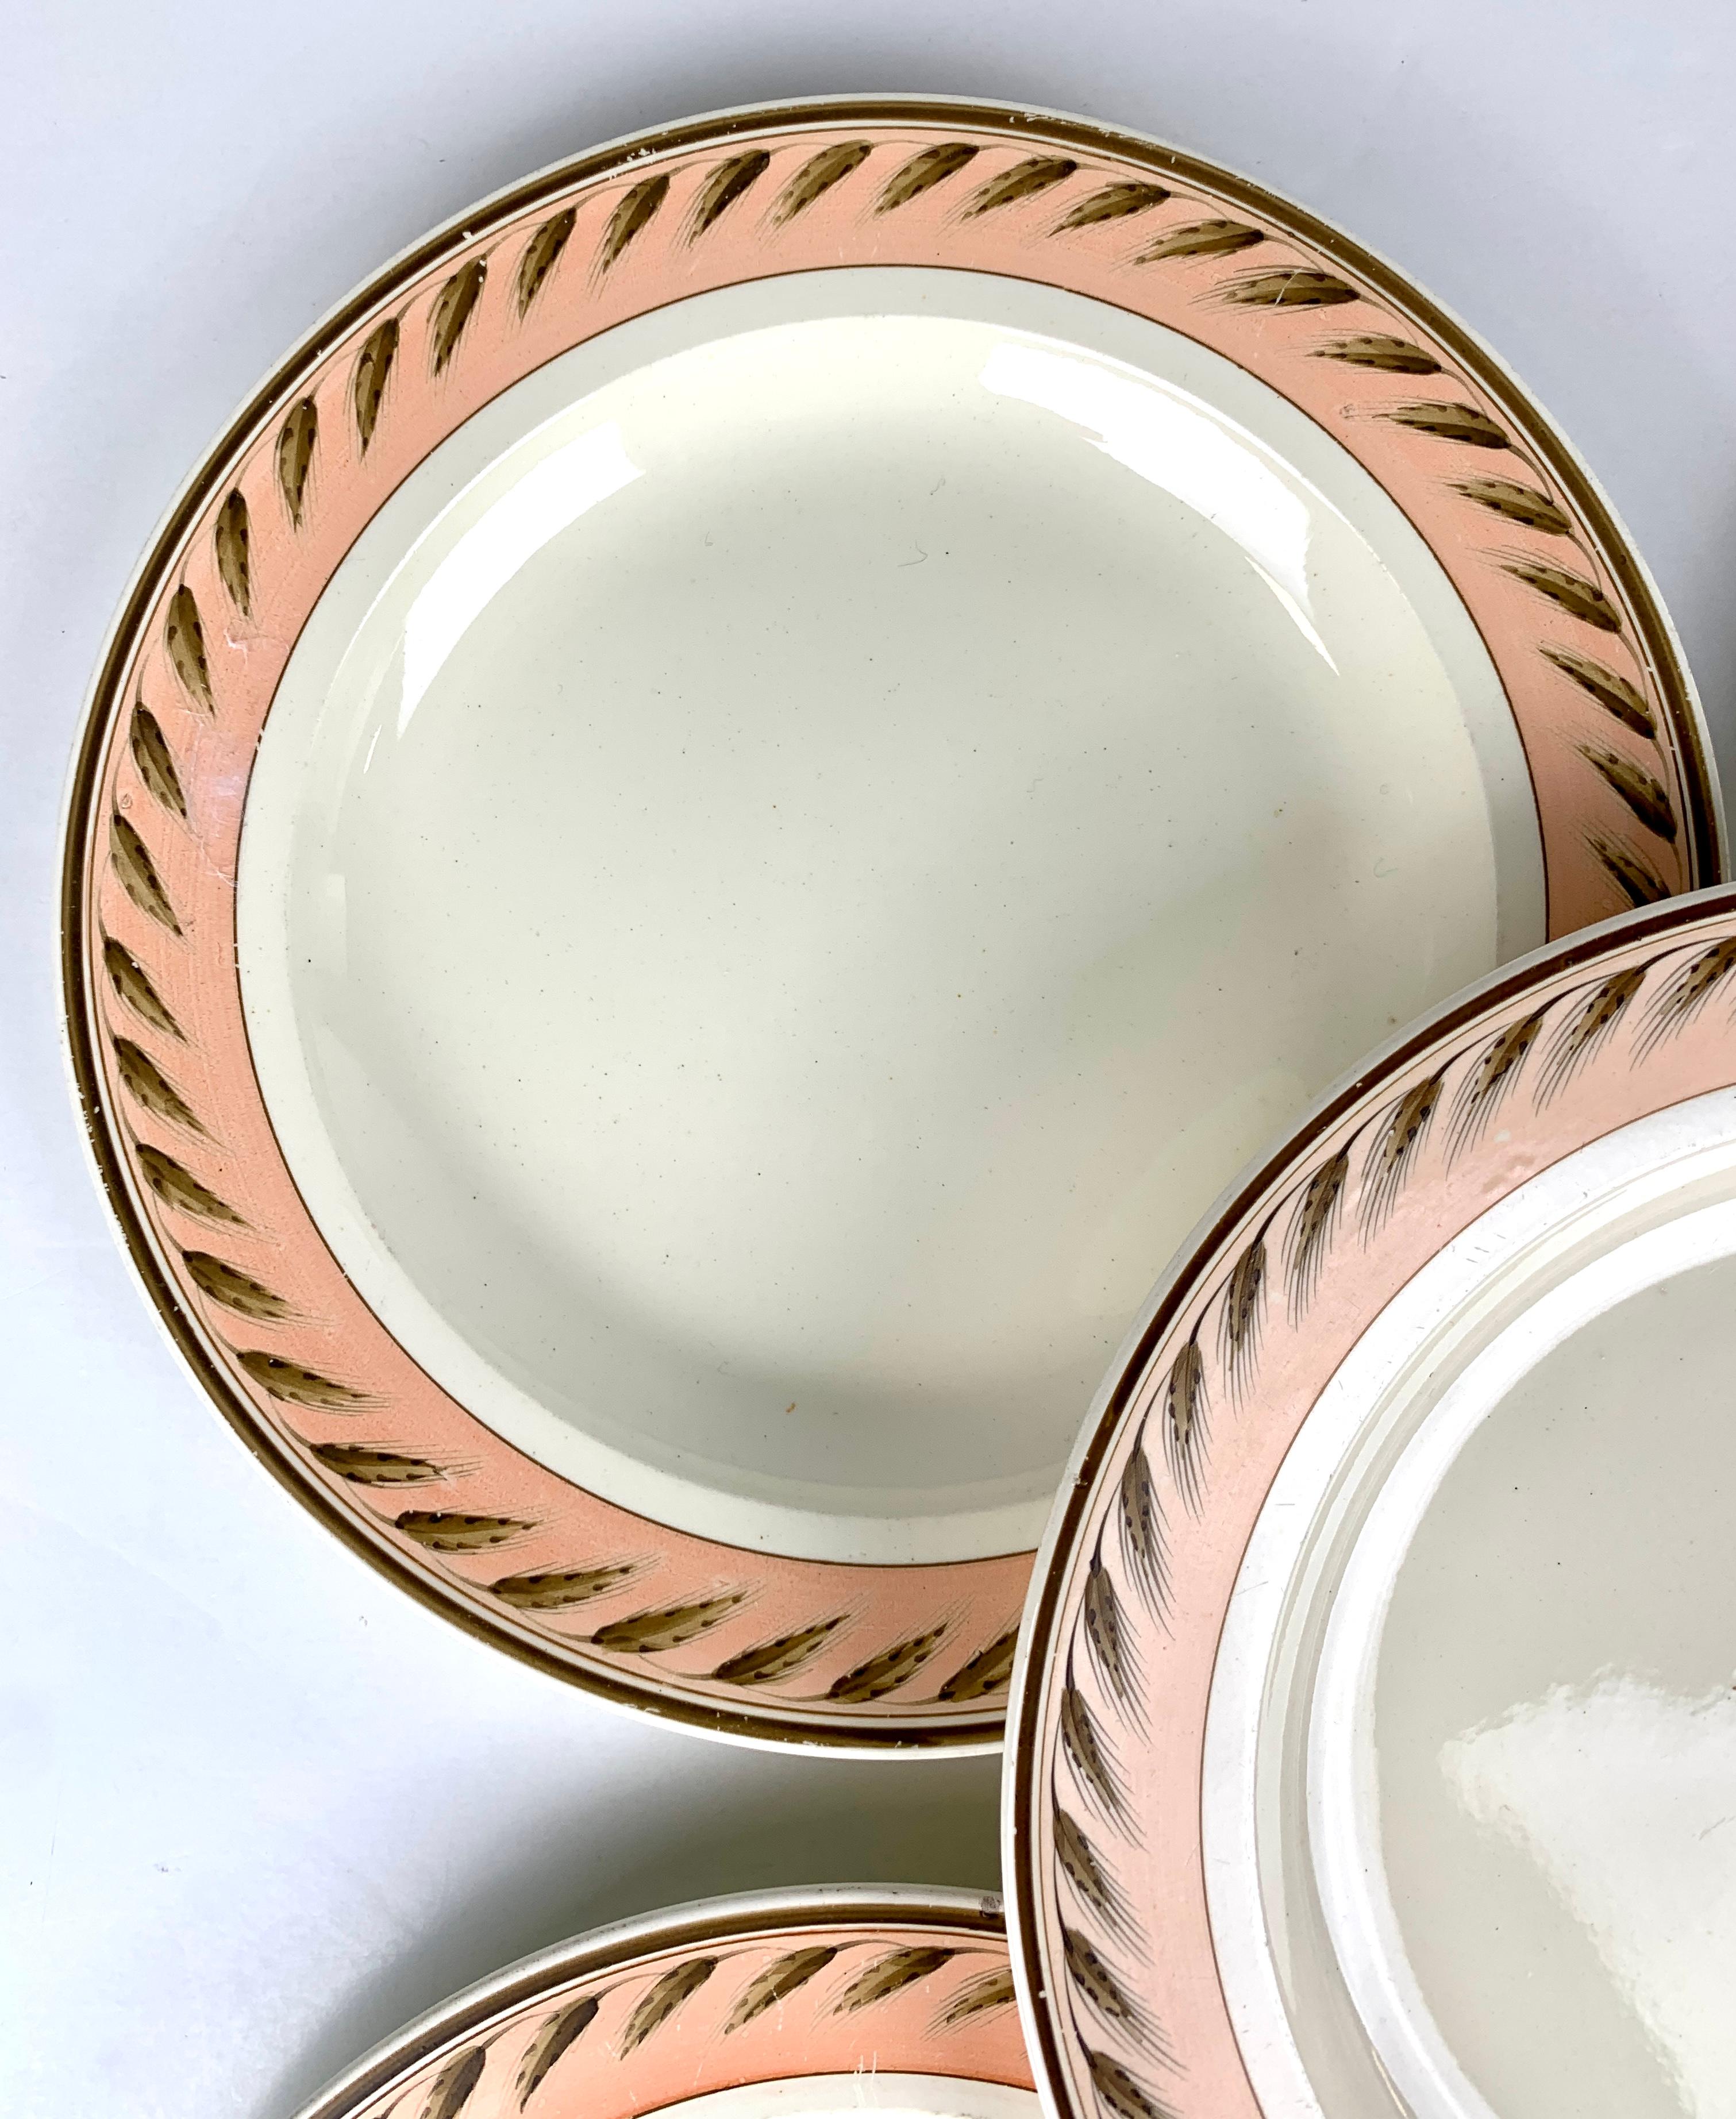 Made in England in the early 19th century, circa 1815, these Wedgwood dessert or salad dishes are a beautiful and sophisticated set. The combination of the creamware body with the peach color border and the 18th-century Wedgwood 